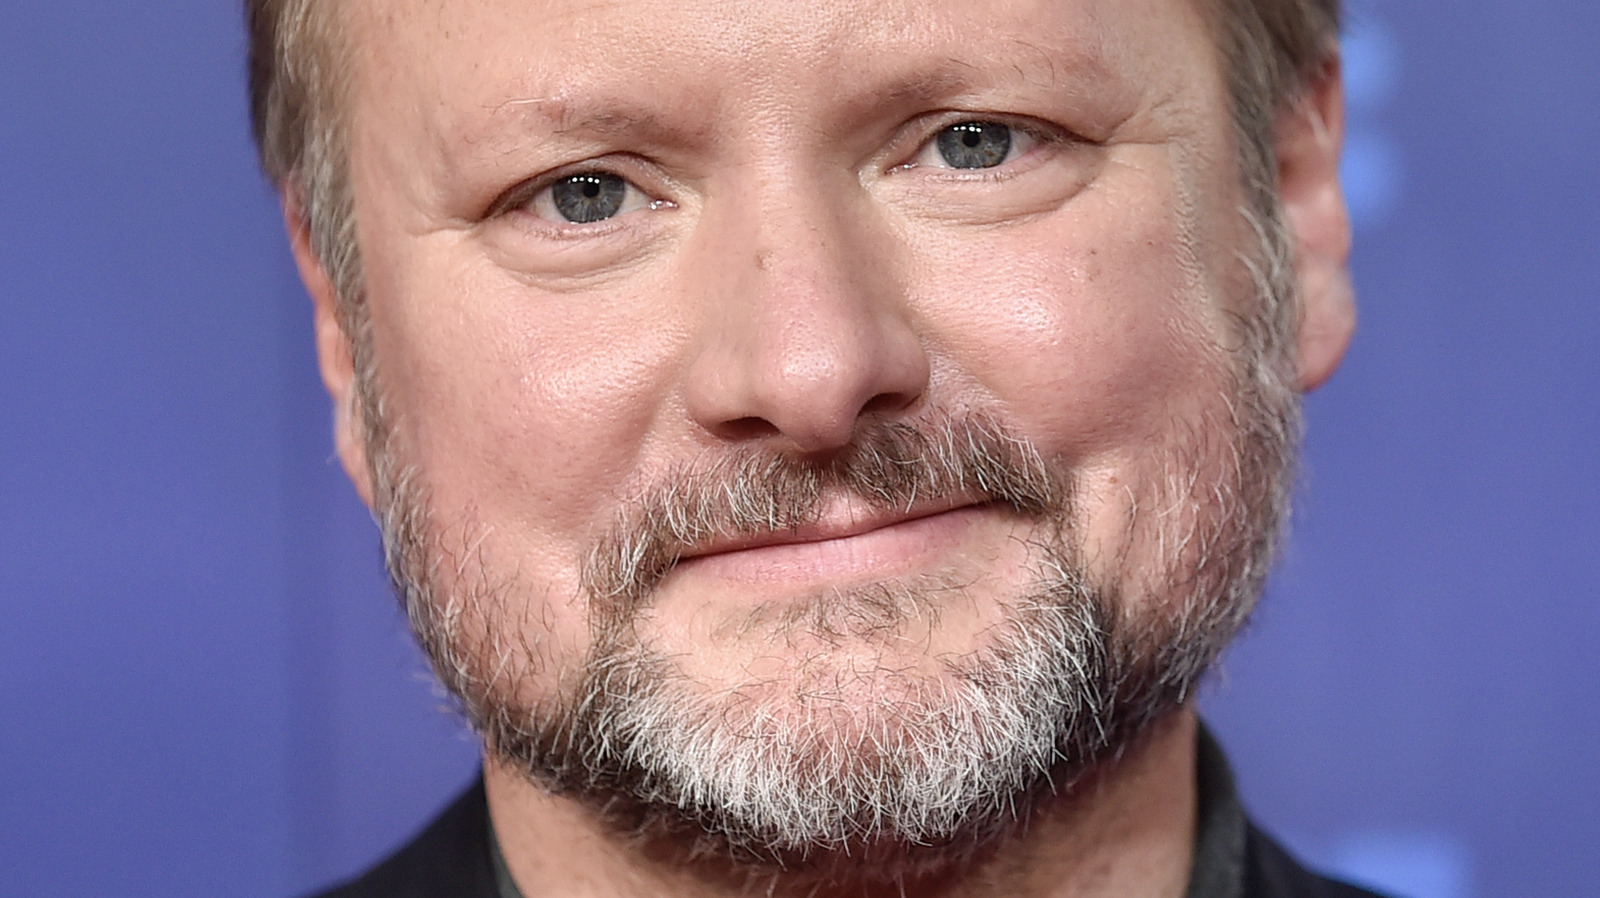 Rian Johnson's Poker Face Reviews Are In, And Critics Aren't